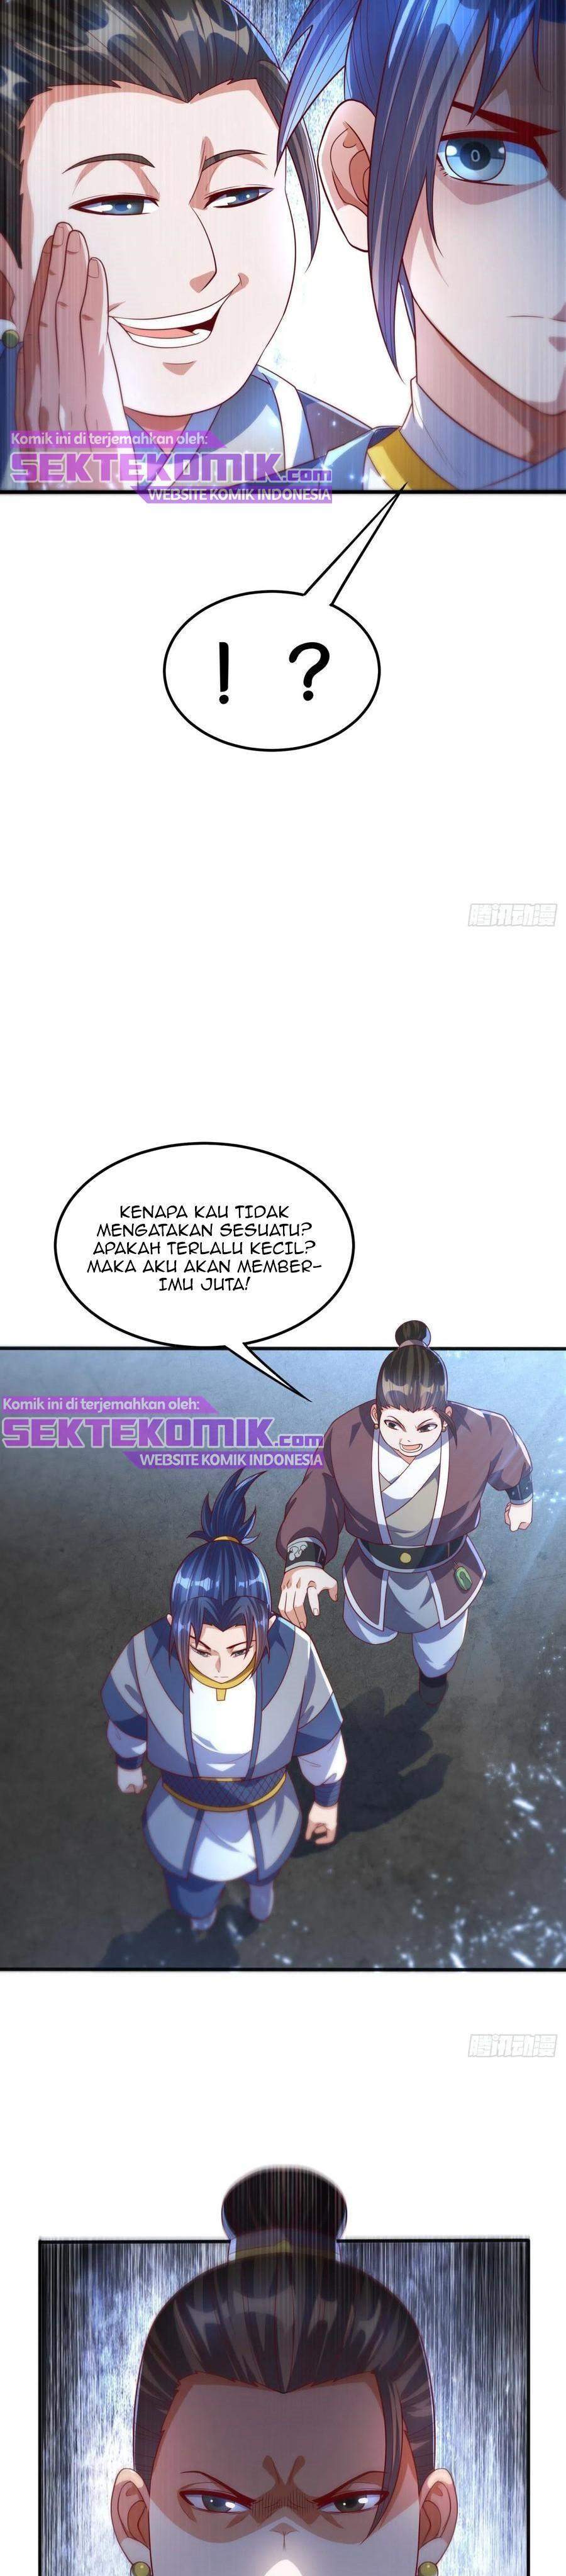 Martial Inverse Chapter 74